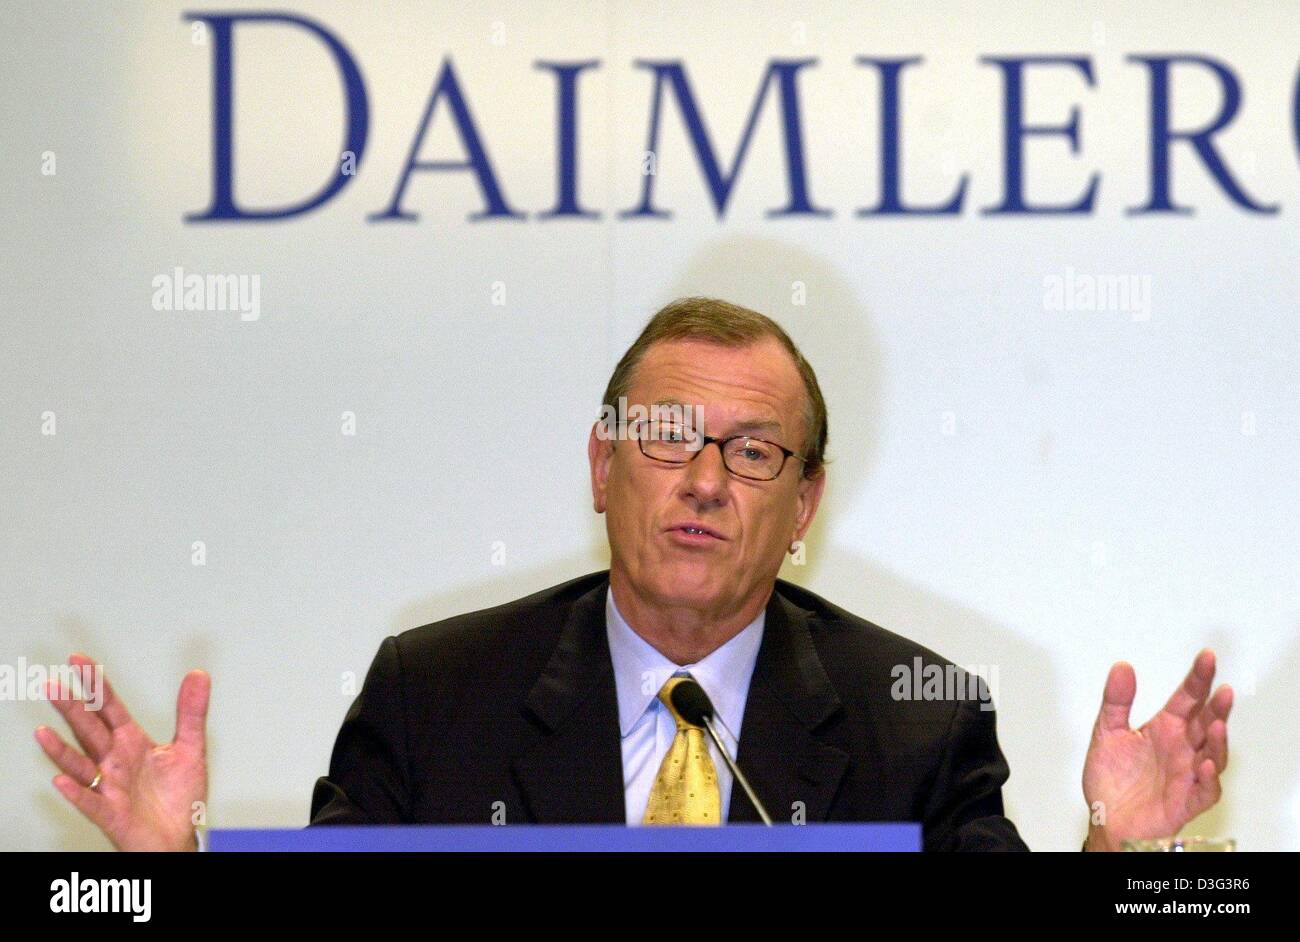 (dpa) - The Chief Executive Officer of DaimlerChrysler, Juergen Schrempp,  addresses journalists during a press conference at his company's headquarters in Stuttgart, southwestern Germany, 20 February 2003.  Schrempp said that the financial forecast for his company in 2003 looks good. Stock Photo